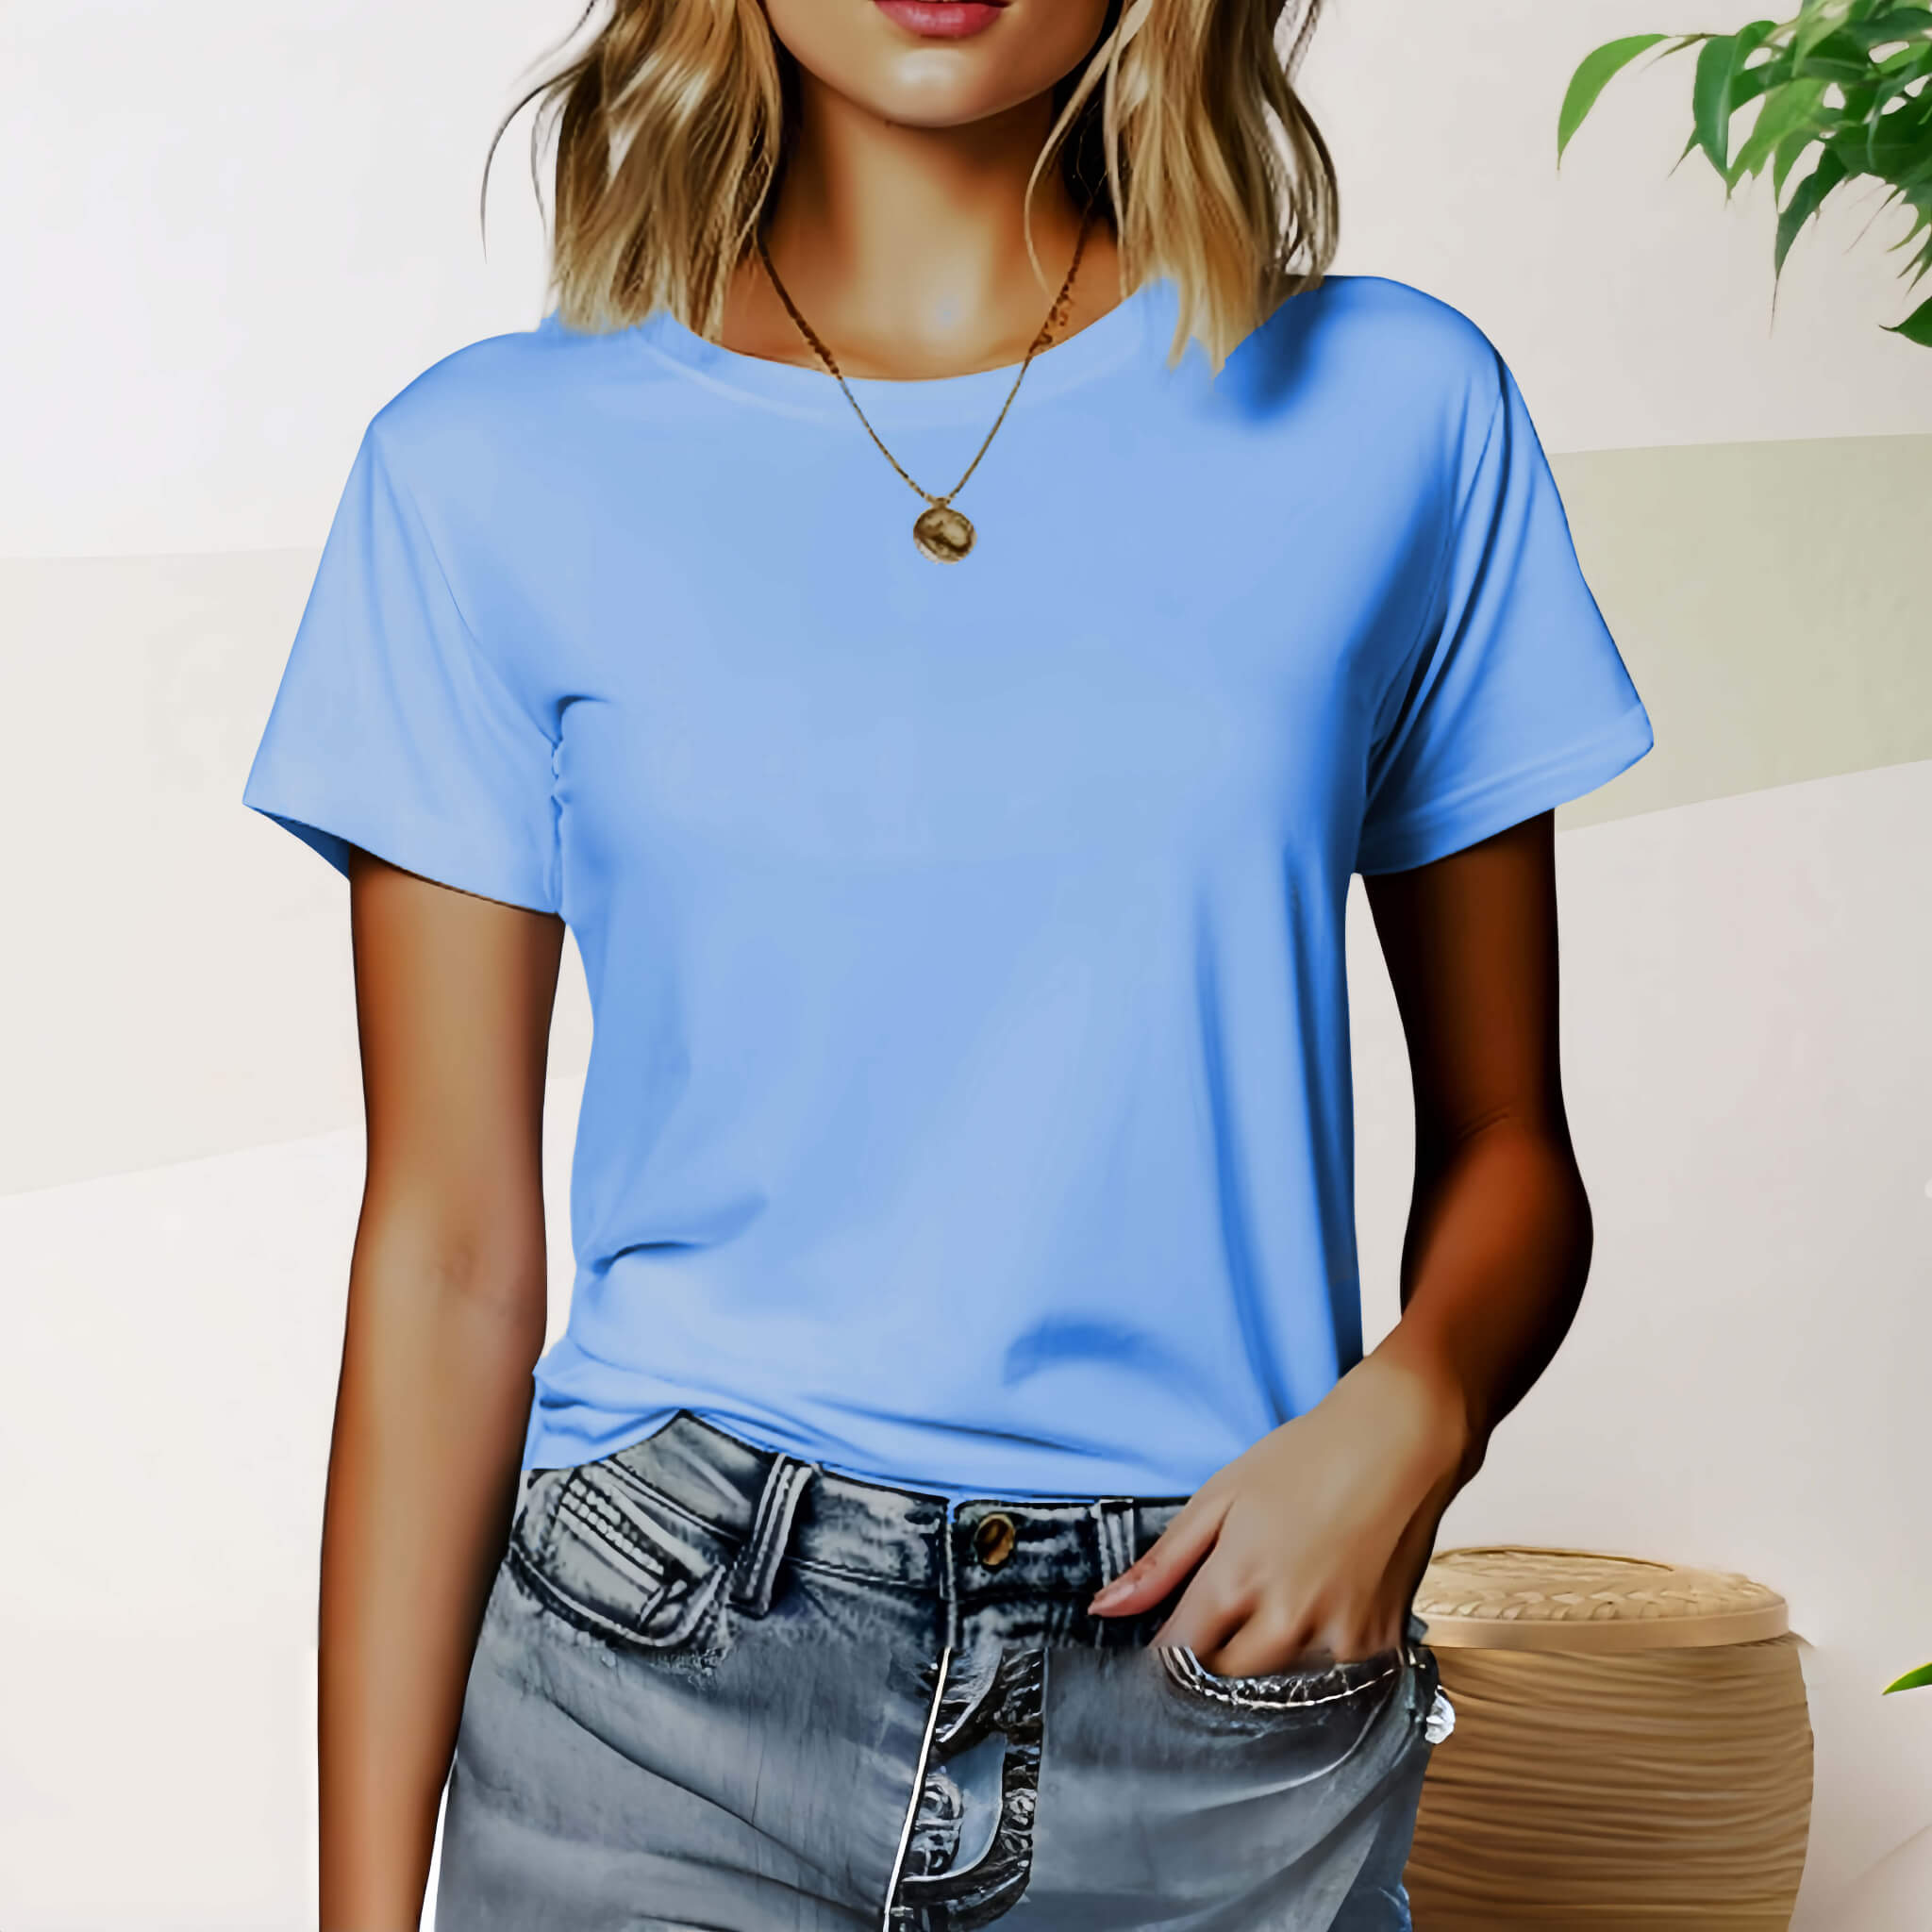 Women's 100% Combed Cotton® Tee  UponBasics Sky Blue XS 